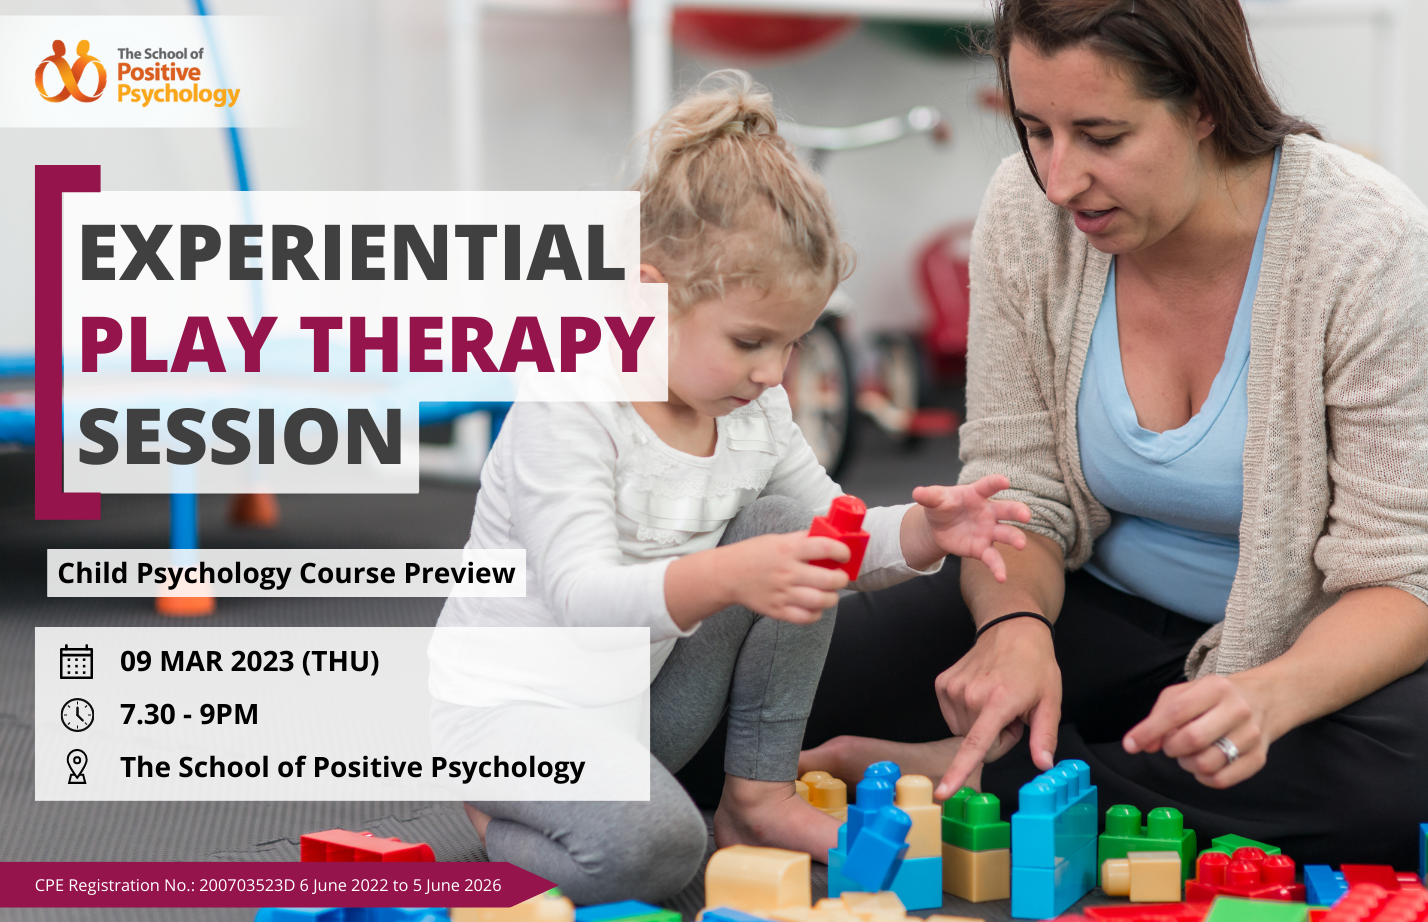 Experiential Play Therapy Session + Child Psychology Course Preview